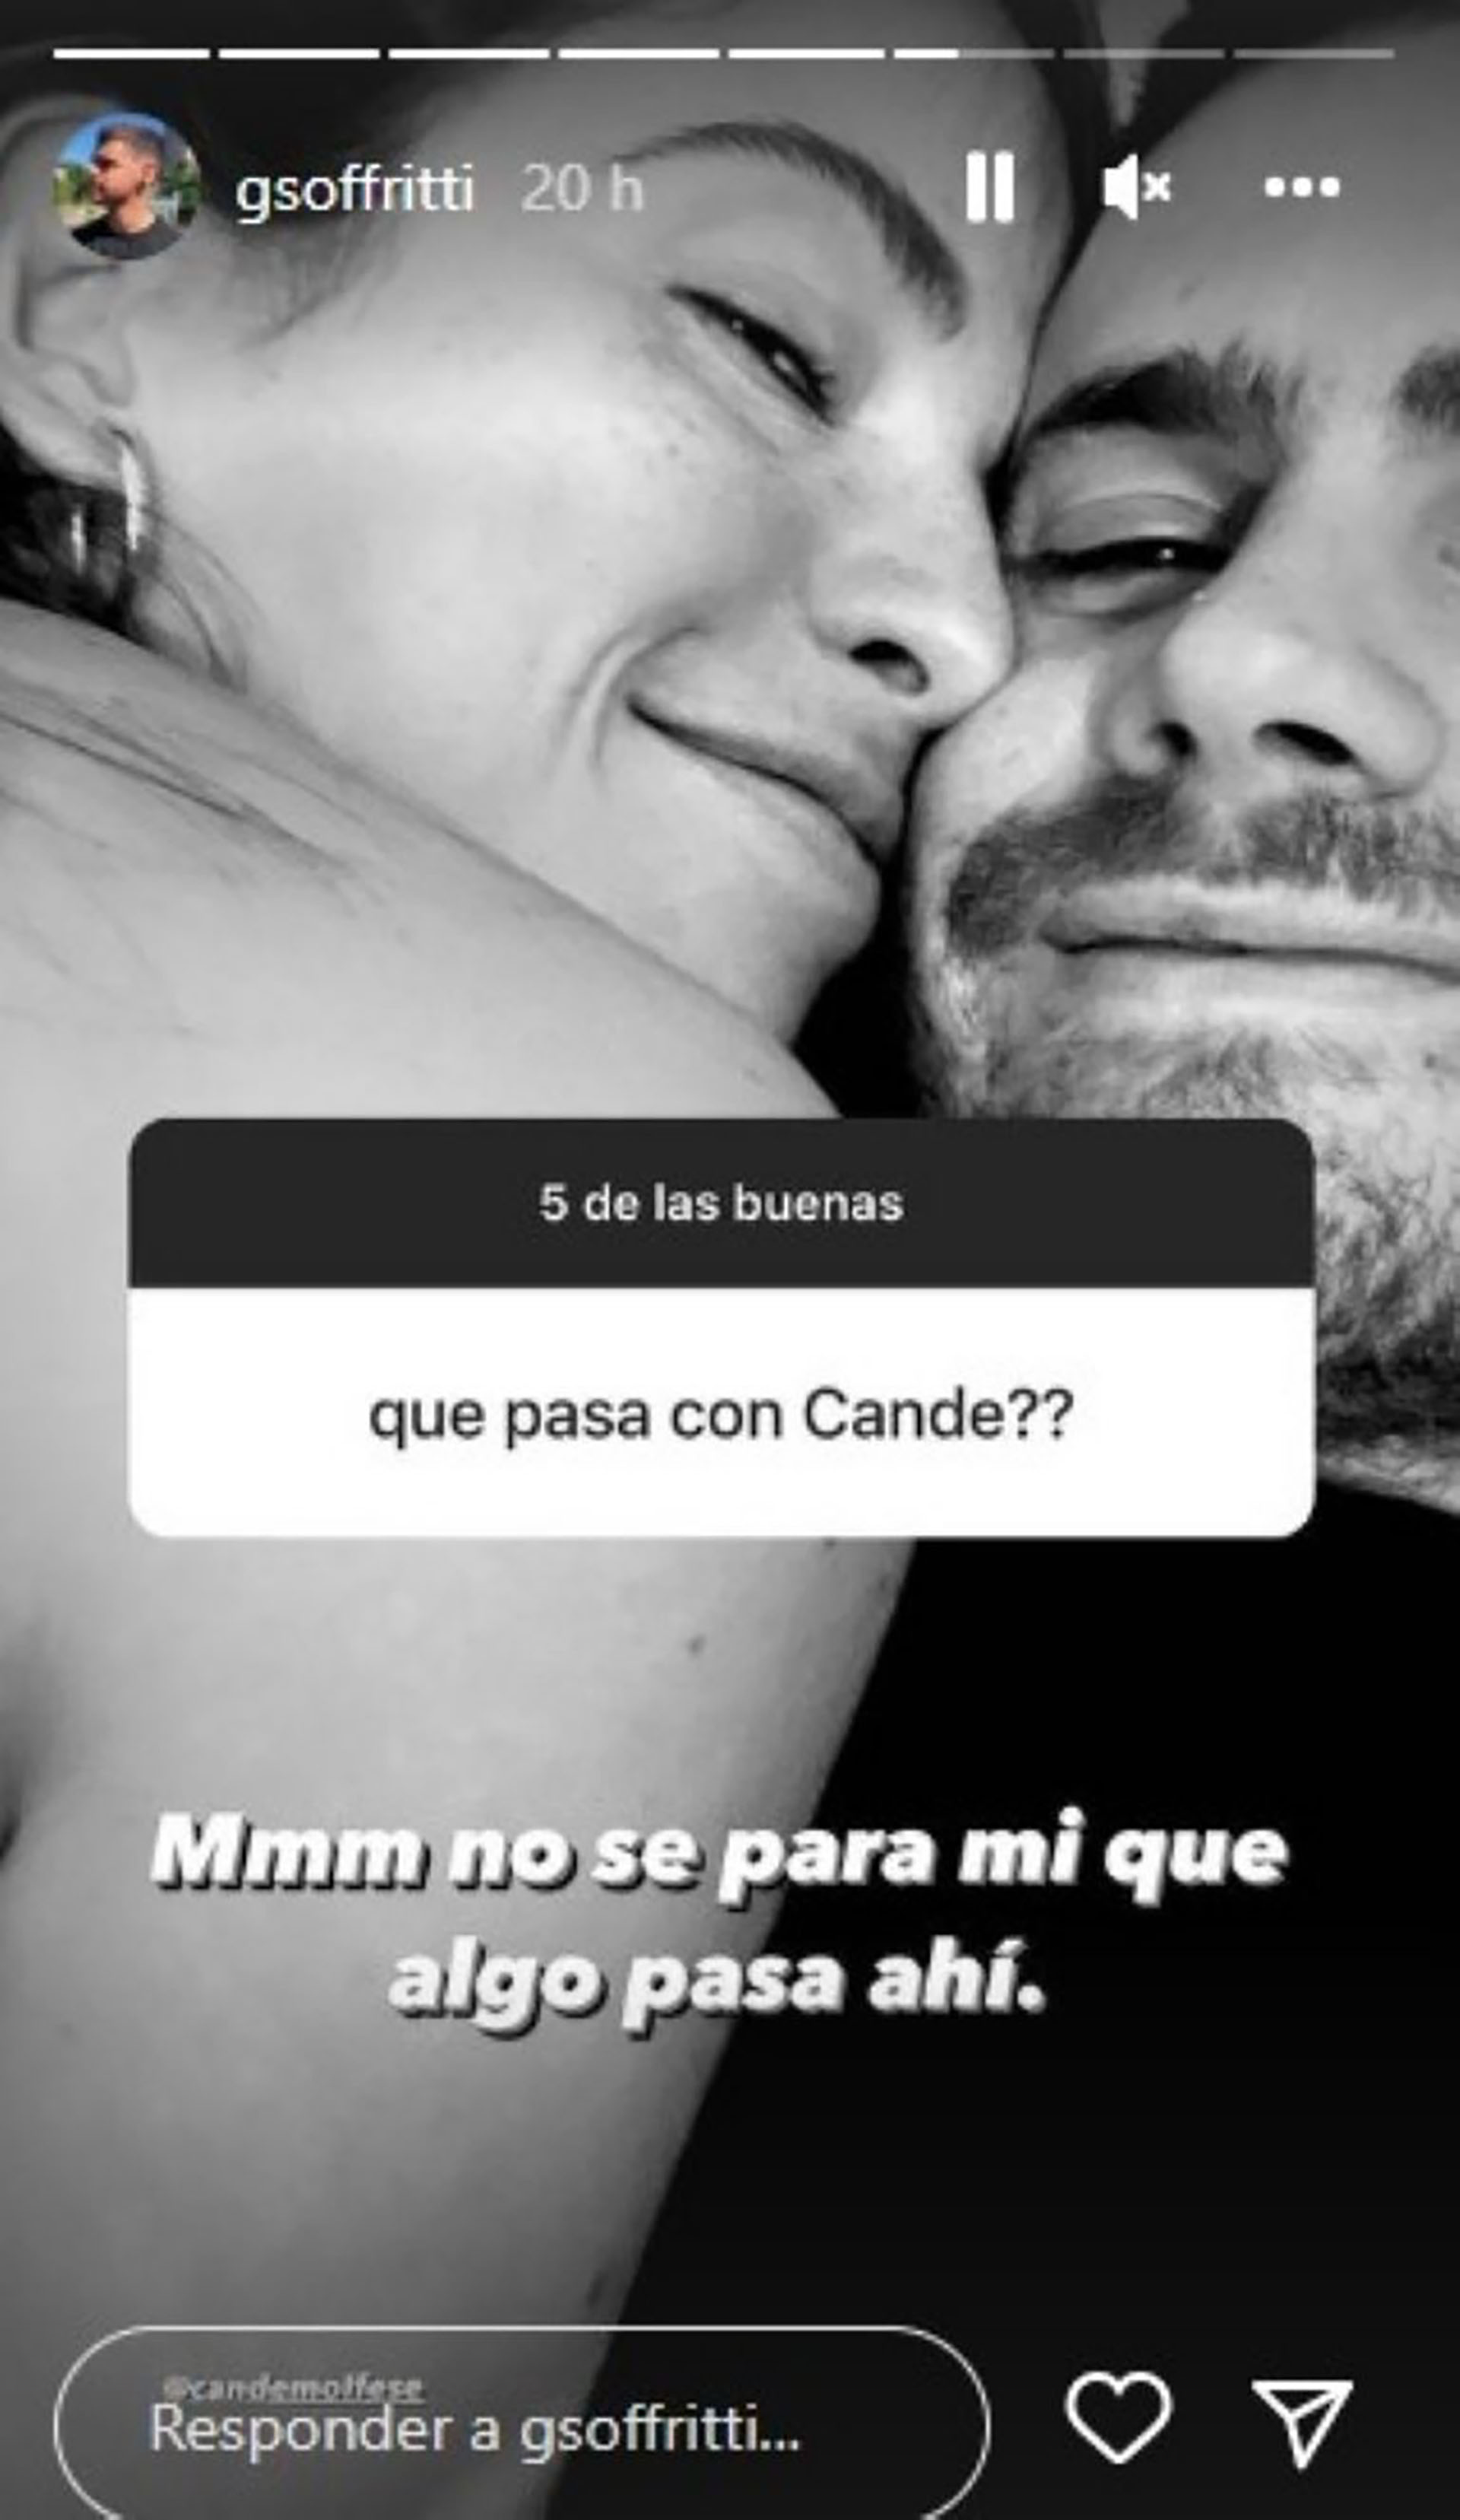 The selfie with which Gastón Soffritti confirmed his romance with Cande Molfese